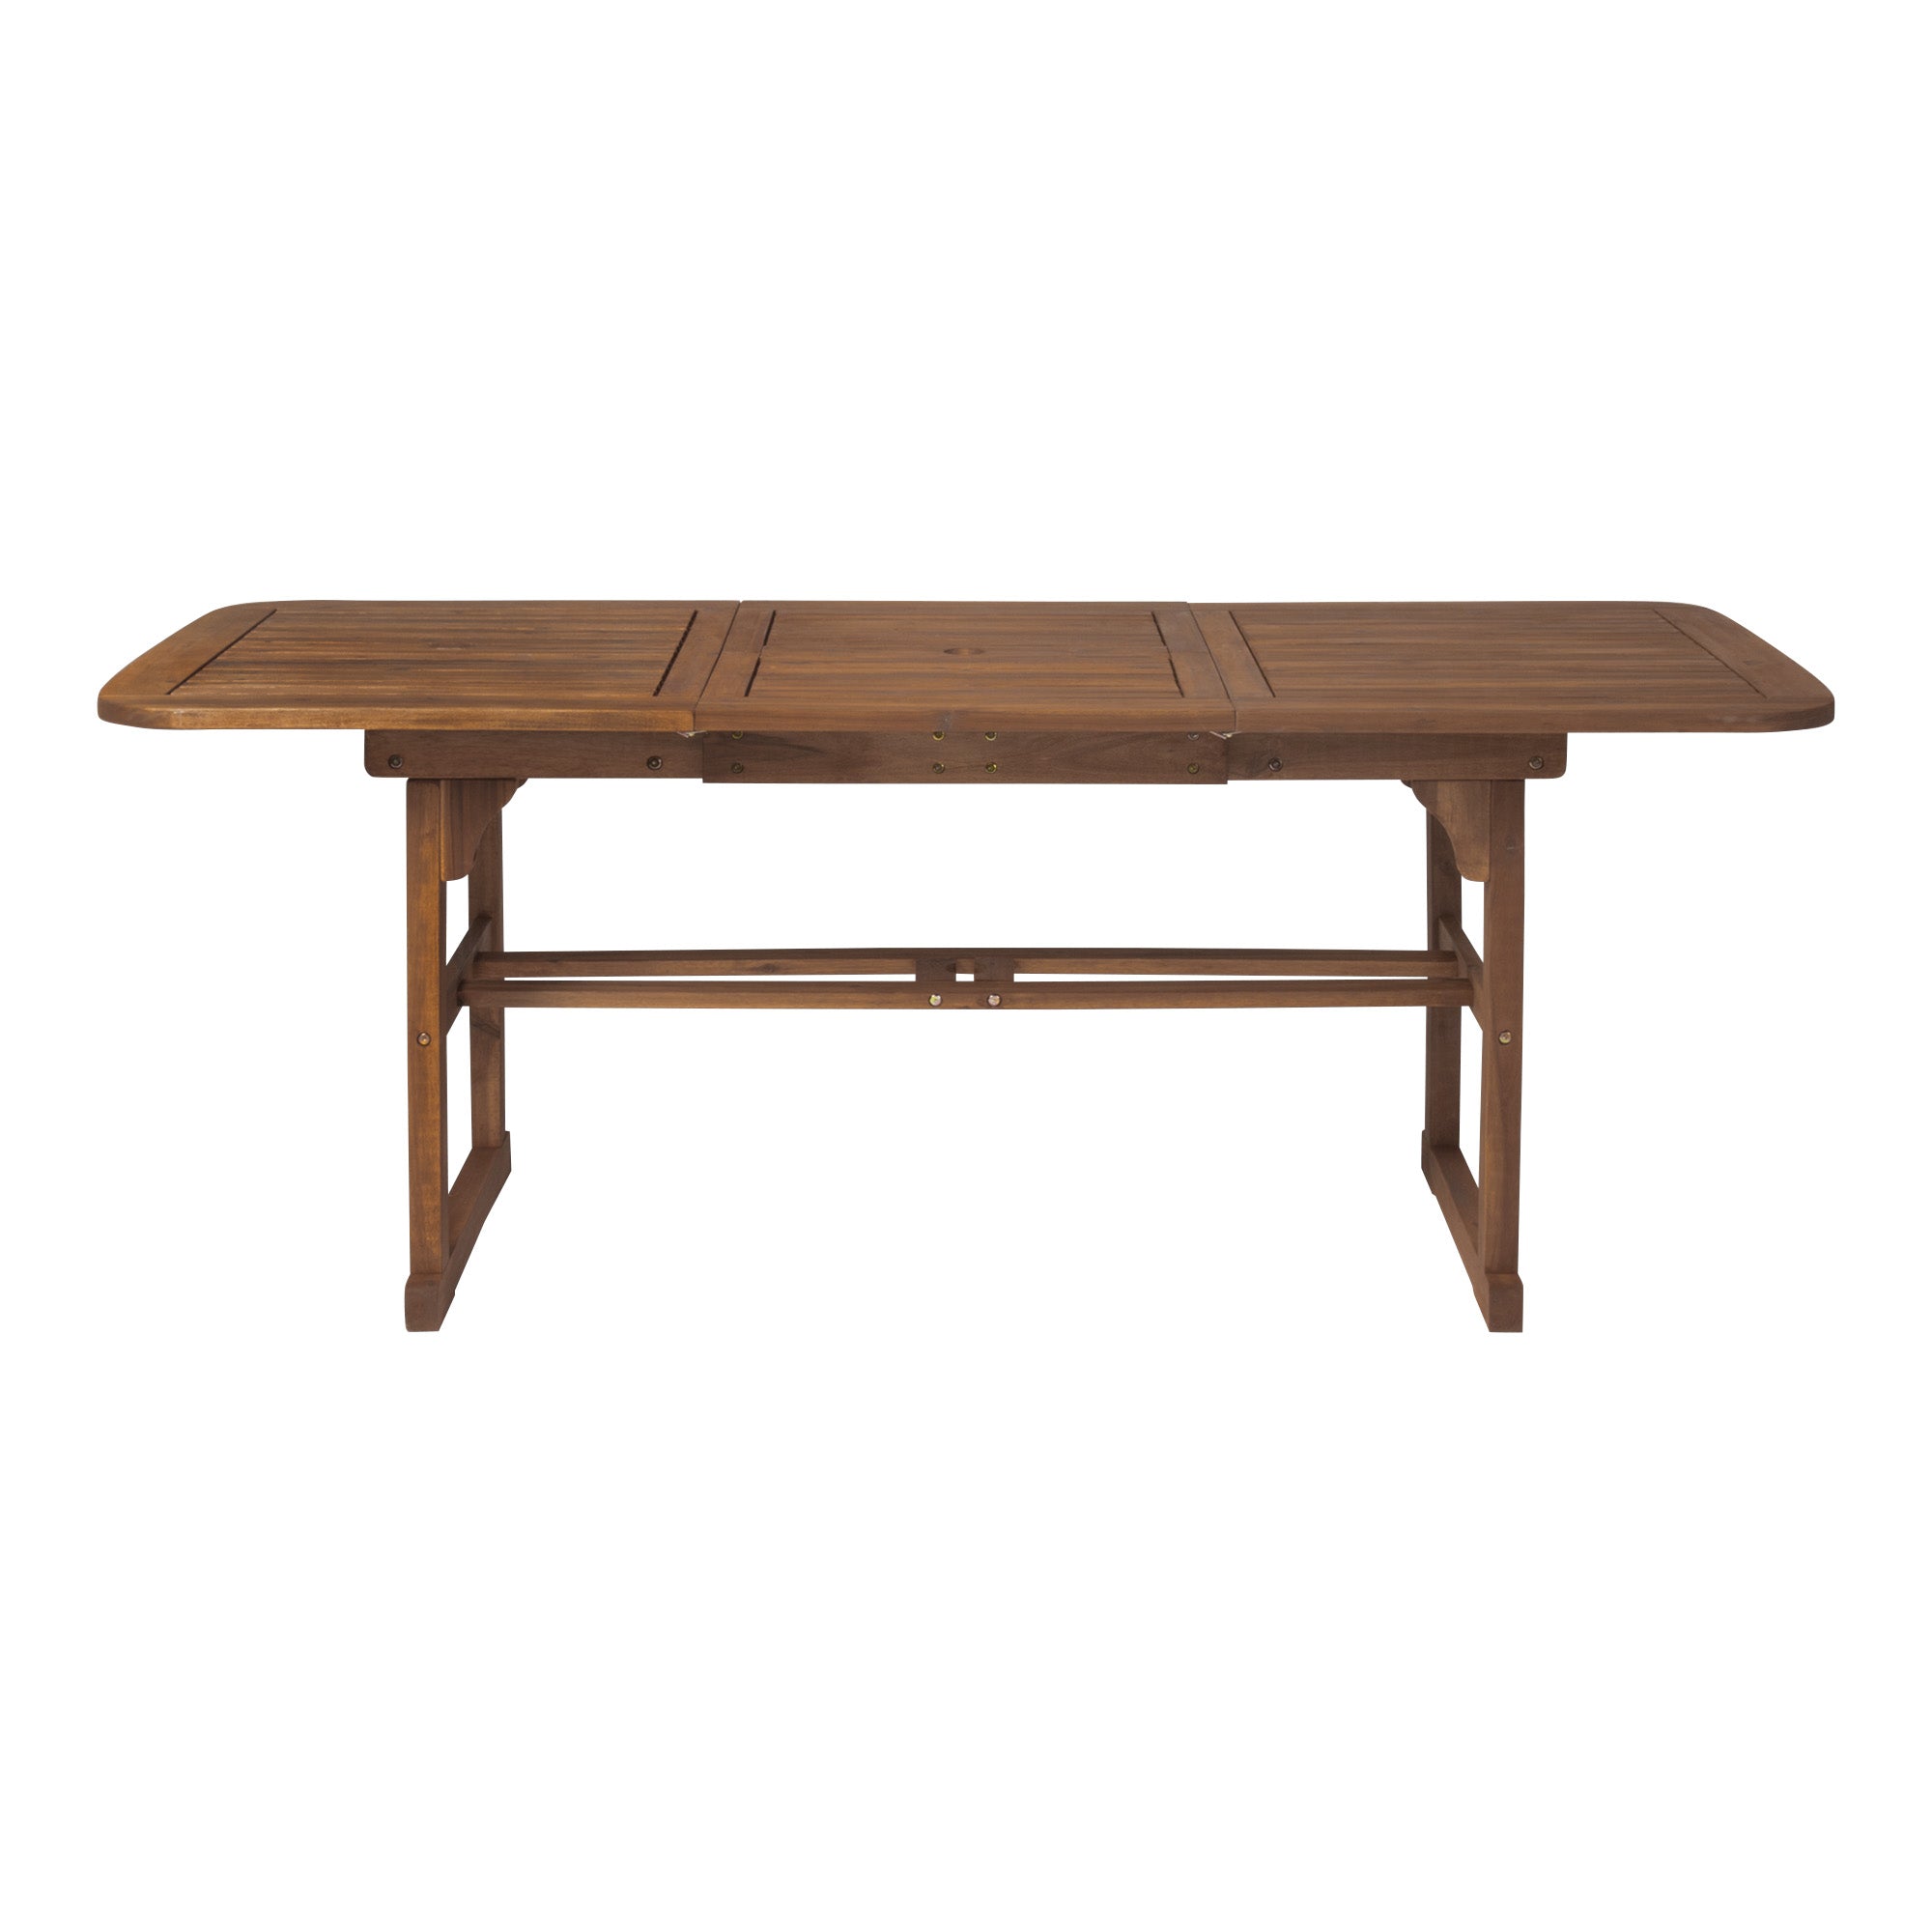 Siren Slat-Top Solid Acacia Wood Butterfly Outdoor Dining Table - Outdoor Dining